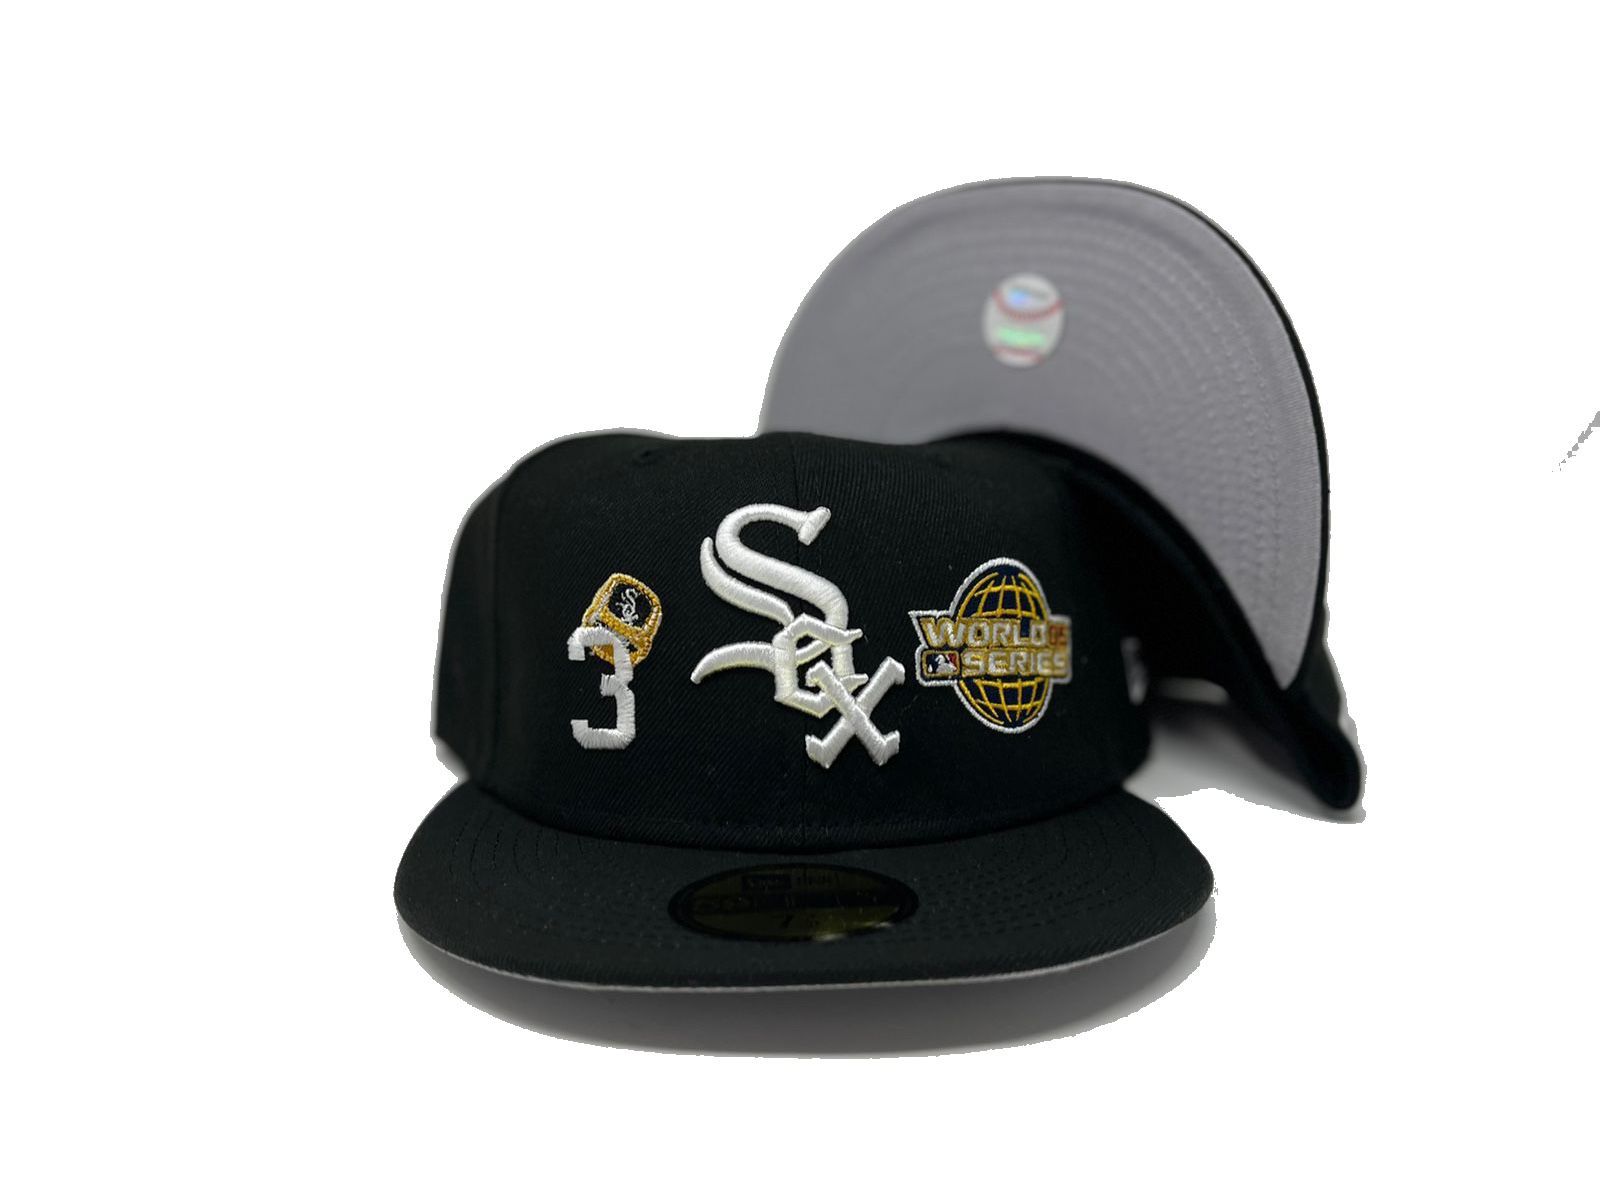 CHICAGO WHITE SOX 3x WORLD SERIES CHAMPIONS NEW ERA FITTED CAP -  ShopperBoard